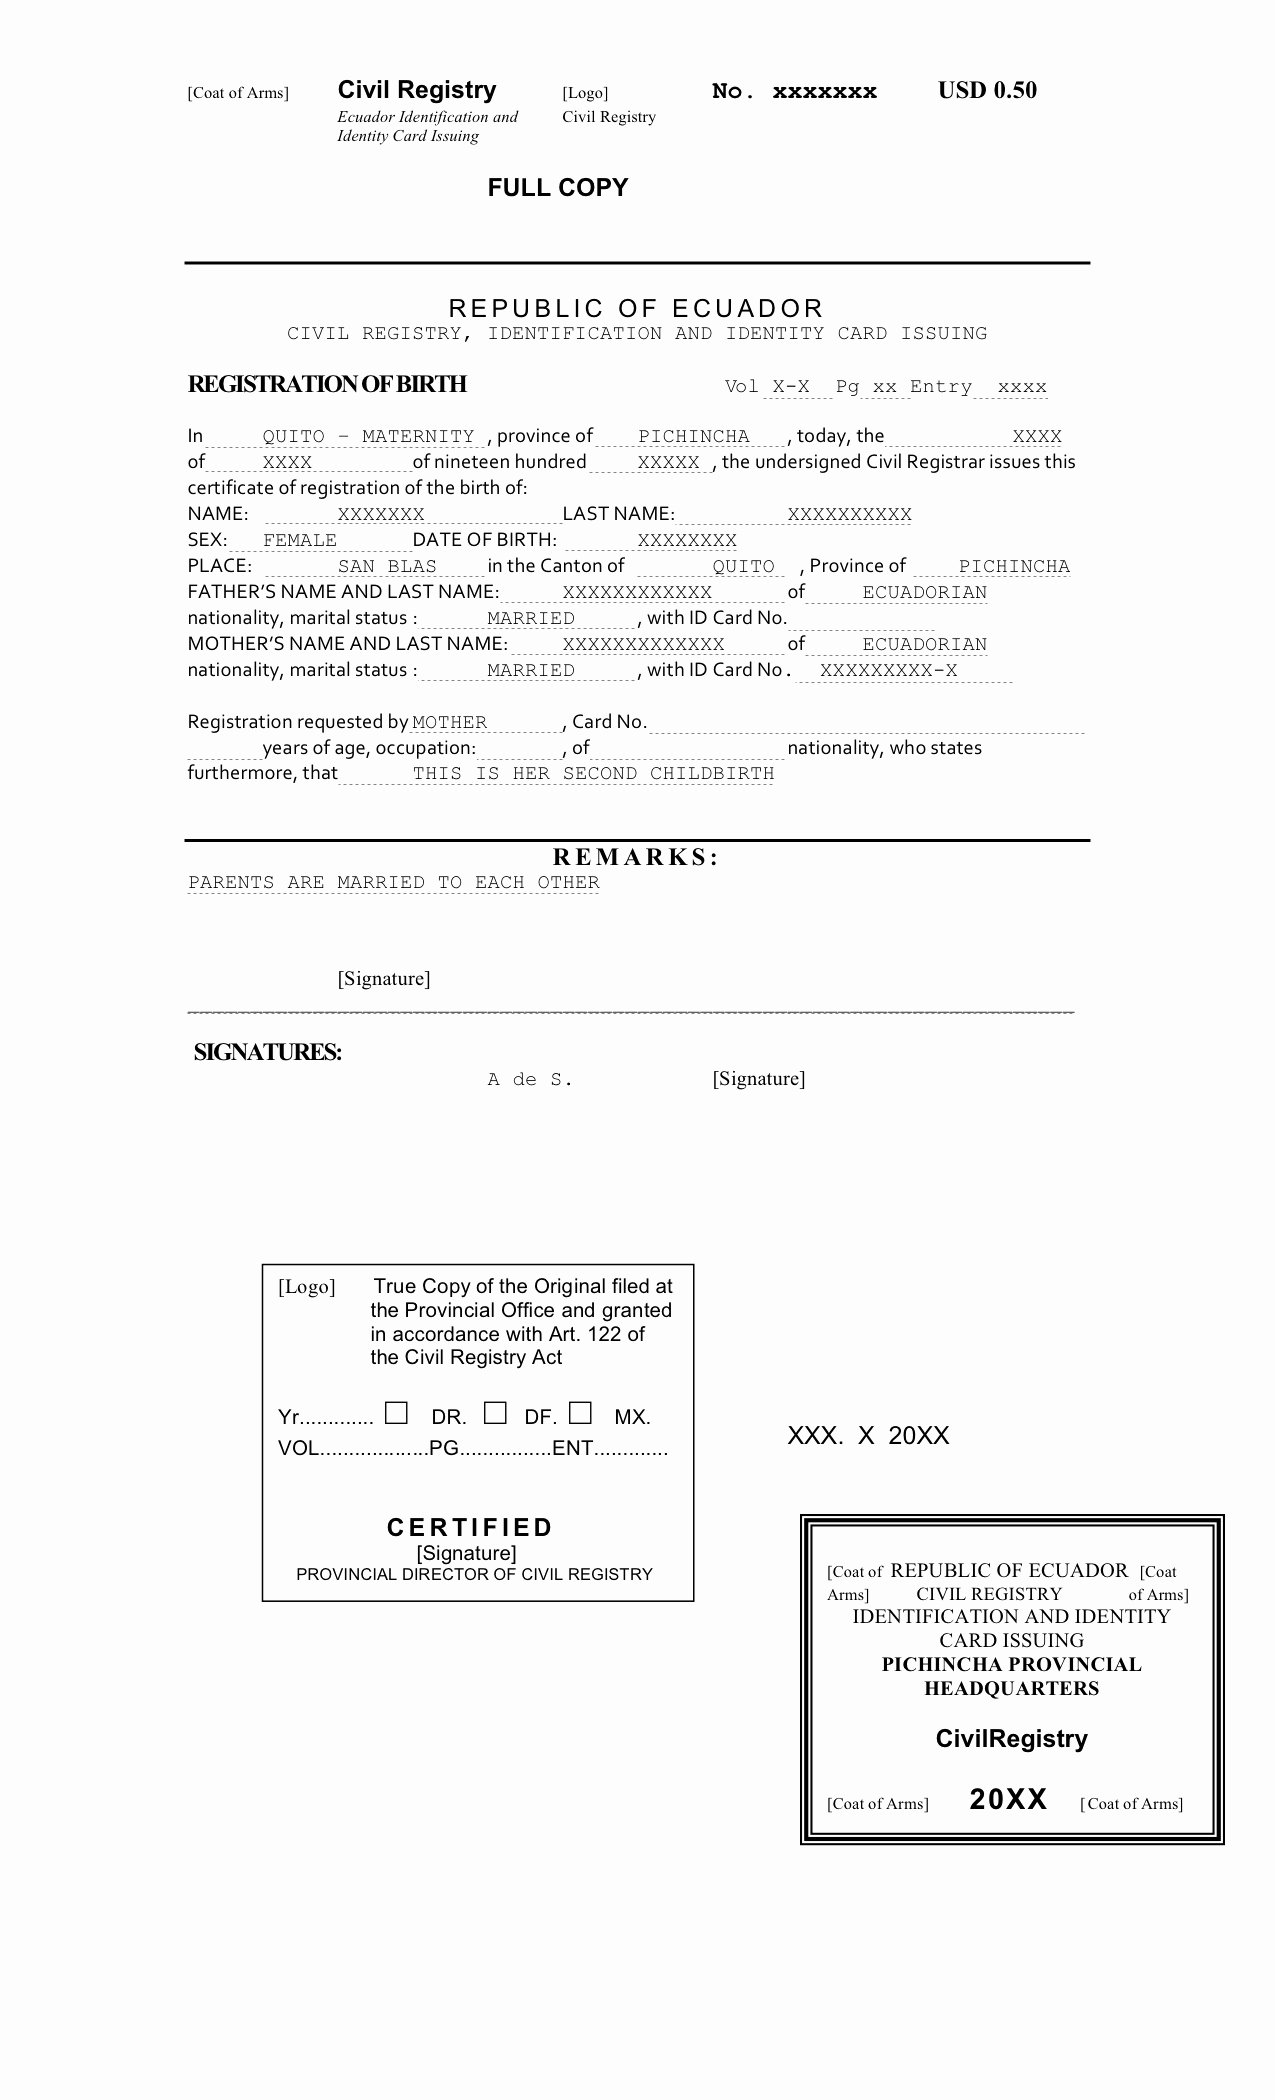 Marriage Certificate Translation From Spanish to English Template Awesome Best S Of Birth Certificate Translated Into English